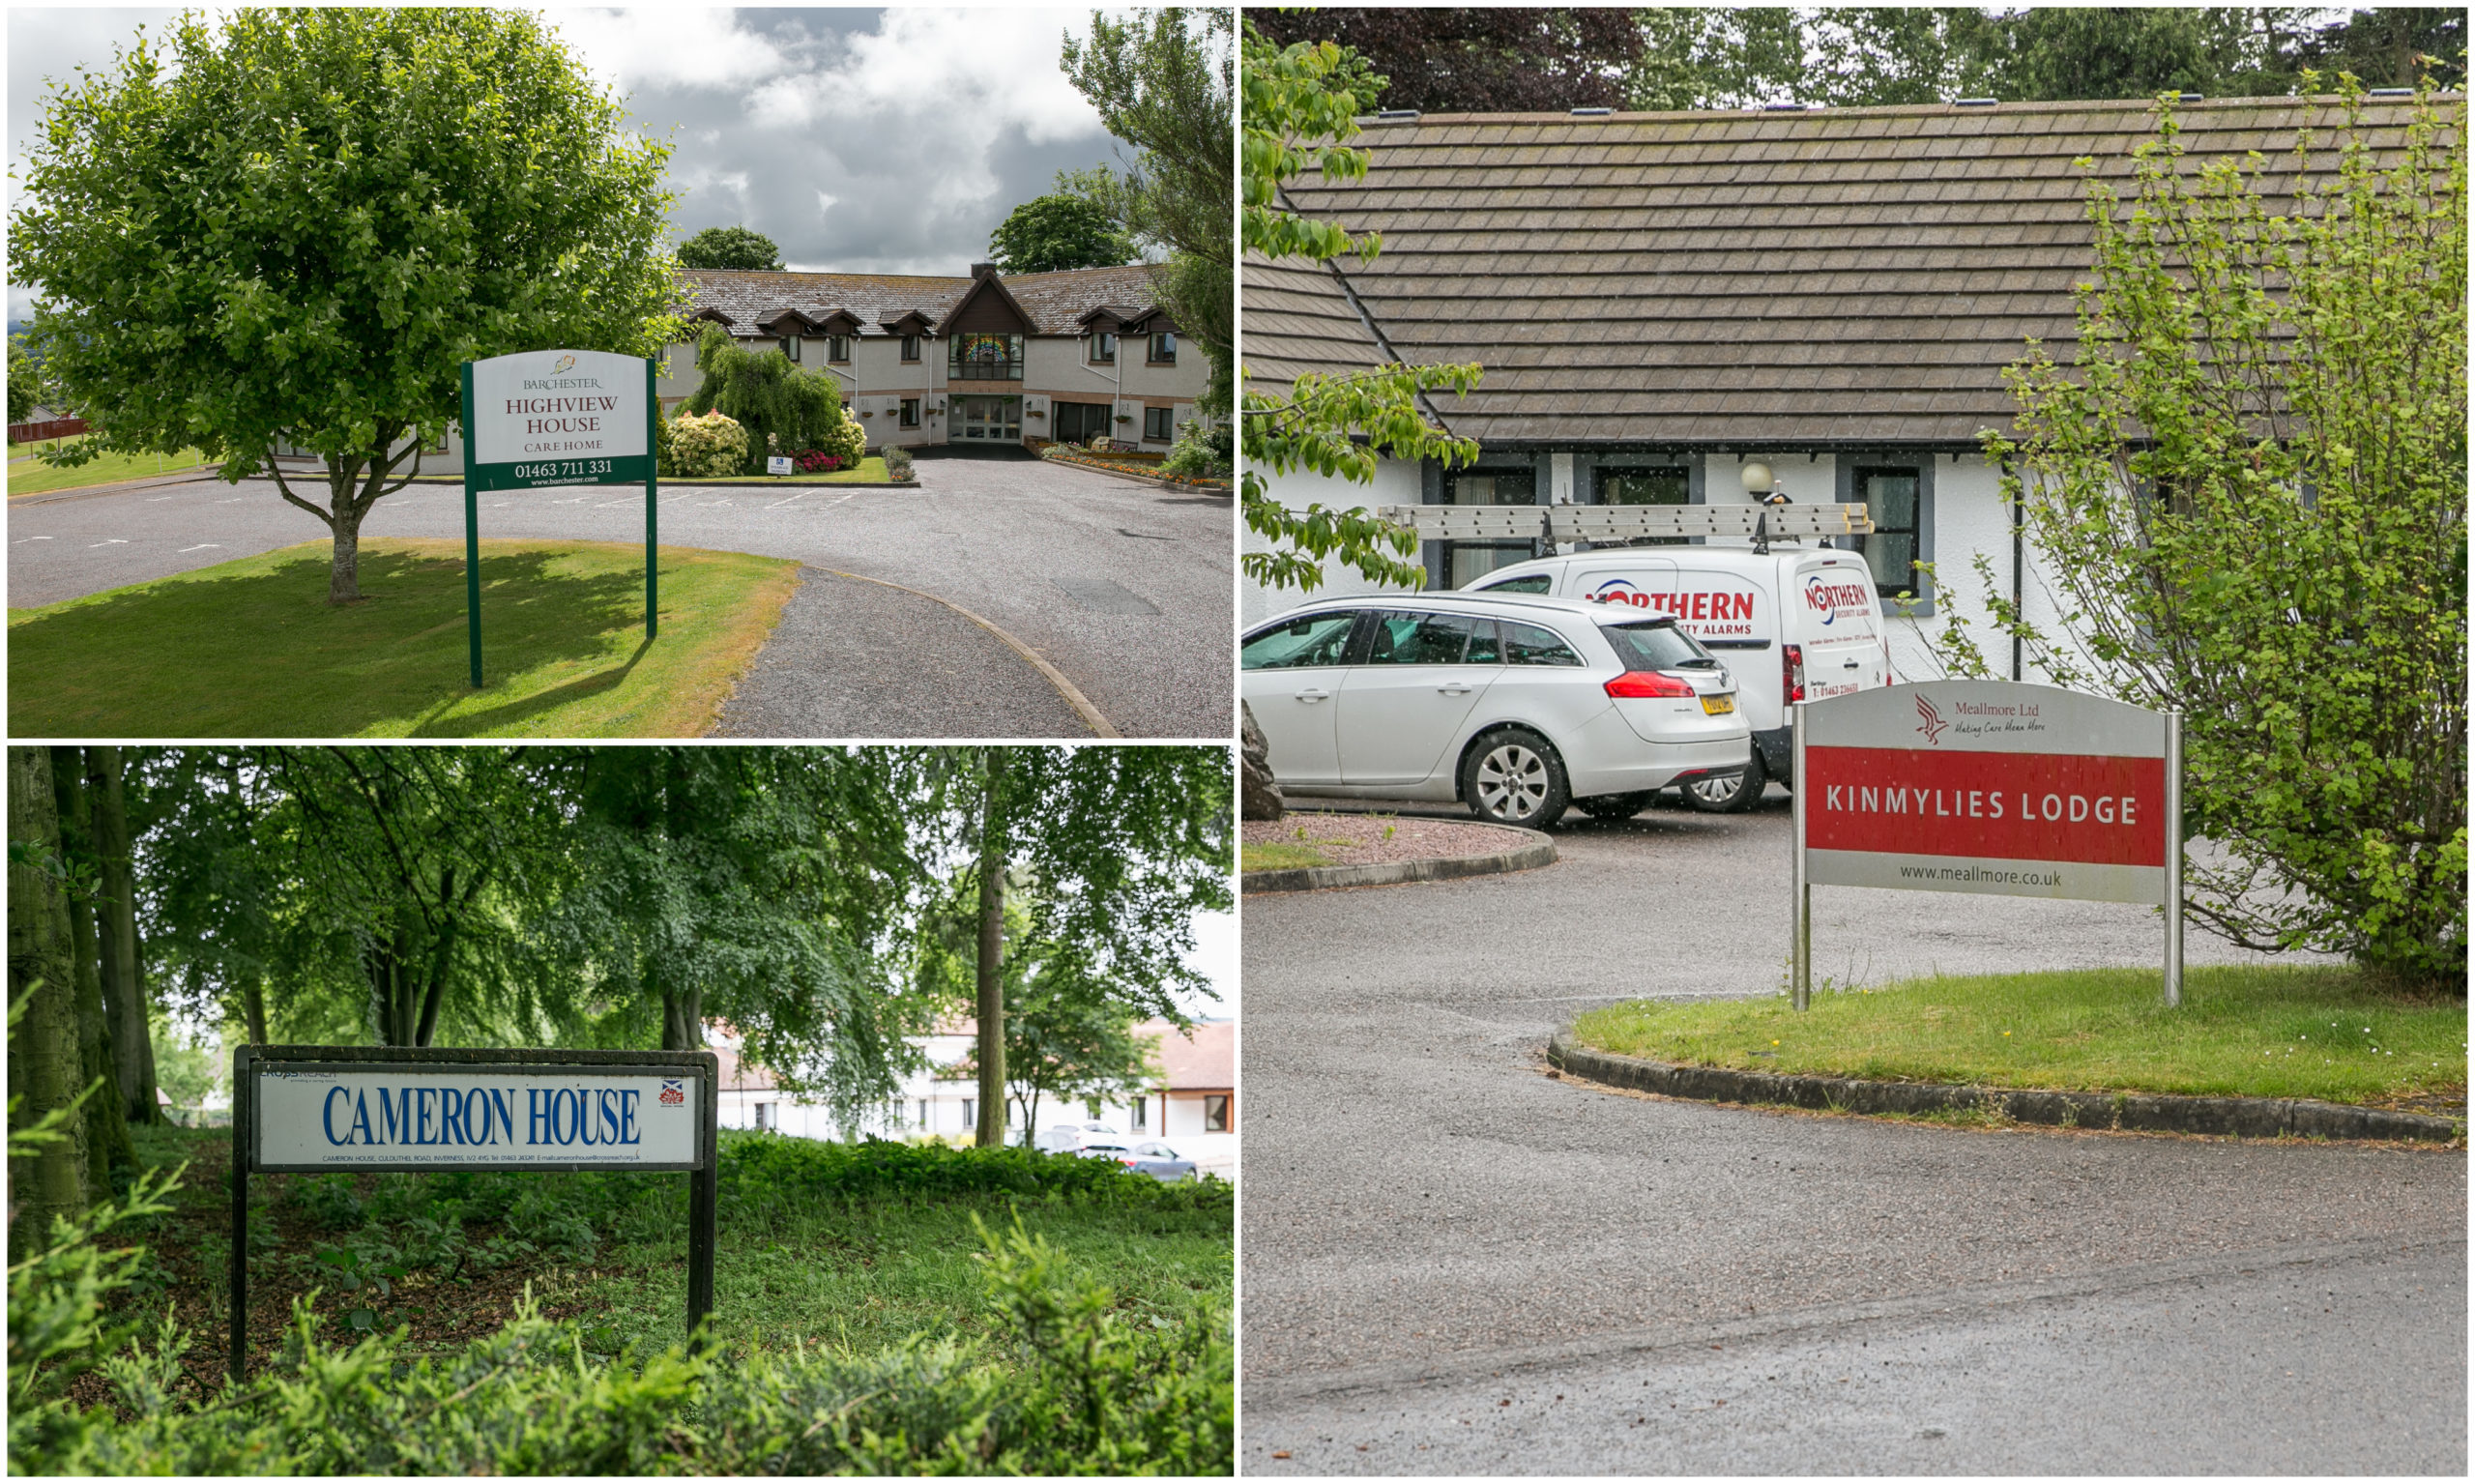 Three Inverness care homes were broken into earlier this week